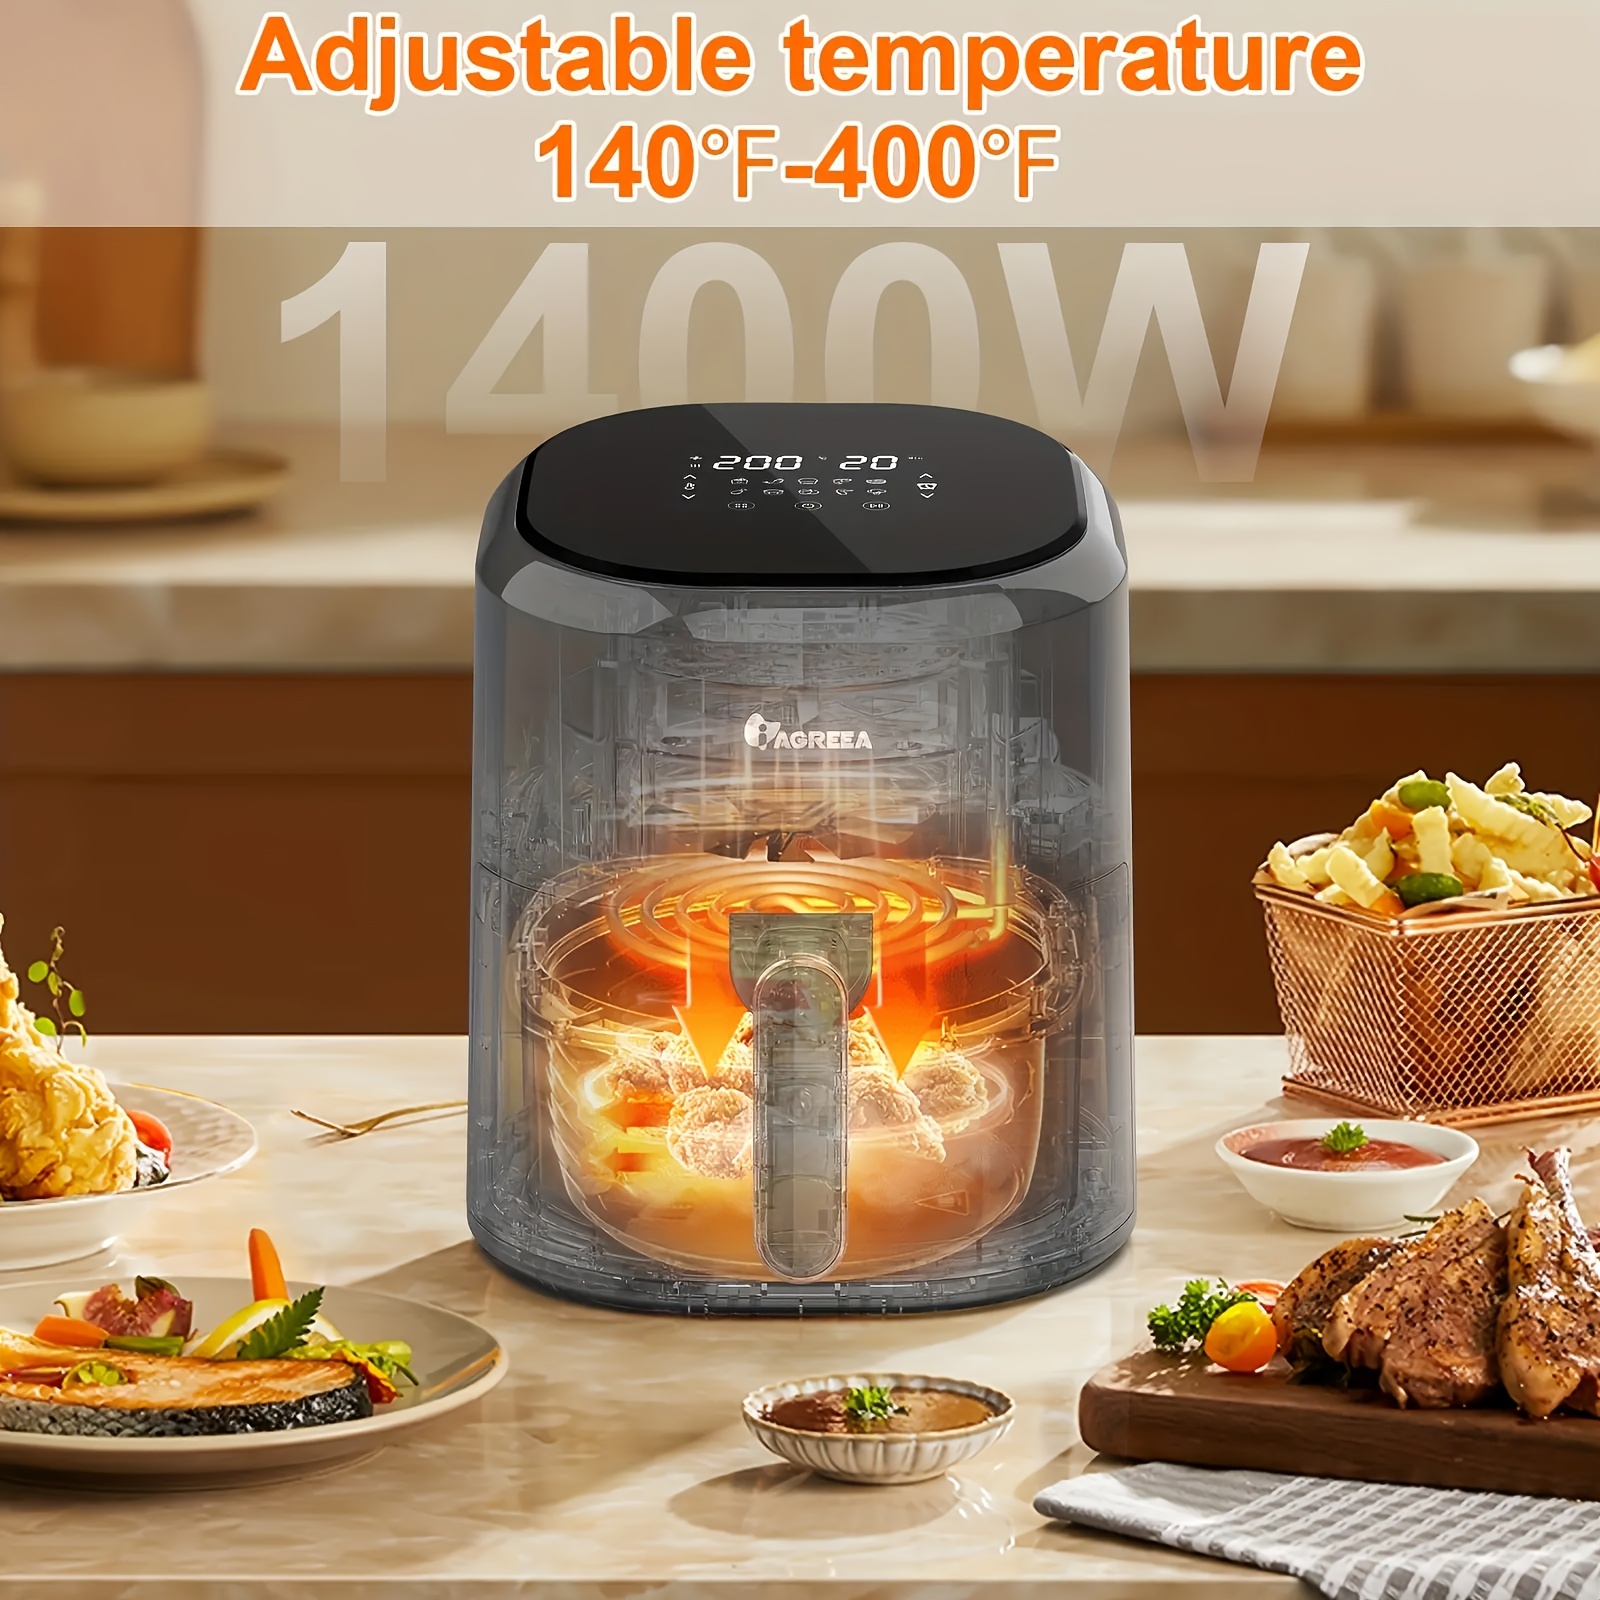 Air Fryer 5qt Large Capacity Smart Air Fryerntc Control,10 Functions Power  Failure Low Fat Roast Low Fat Roast, Roast French Fries, Turkey, Home  Cooking Us Plug Cookware, Kitchenware, Kitchen Accessories Kitchen Stuff